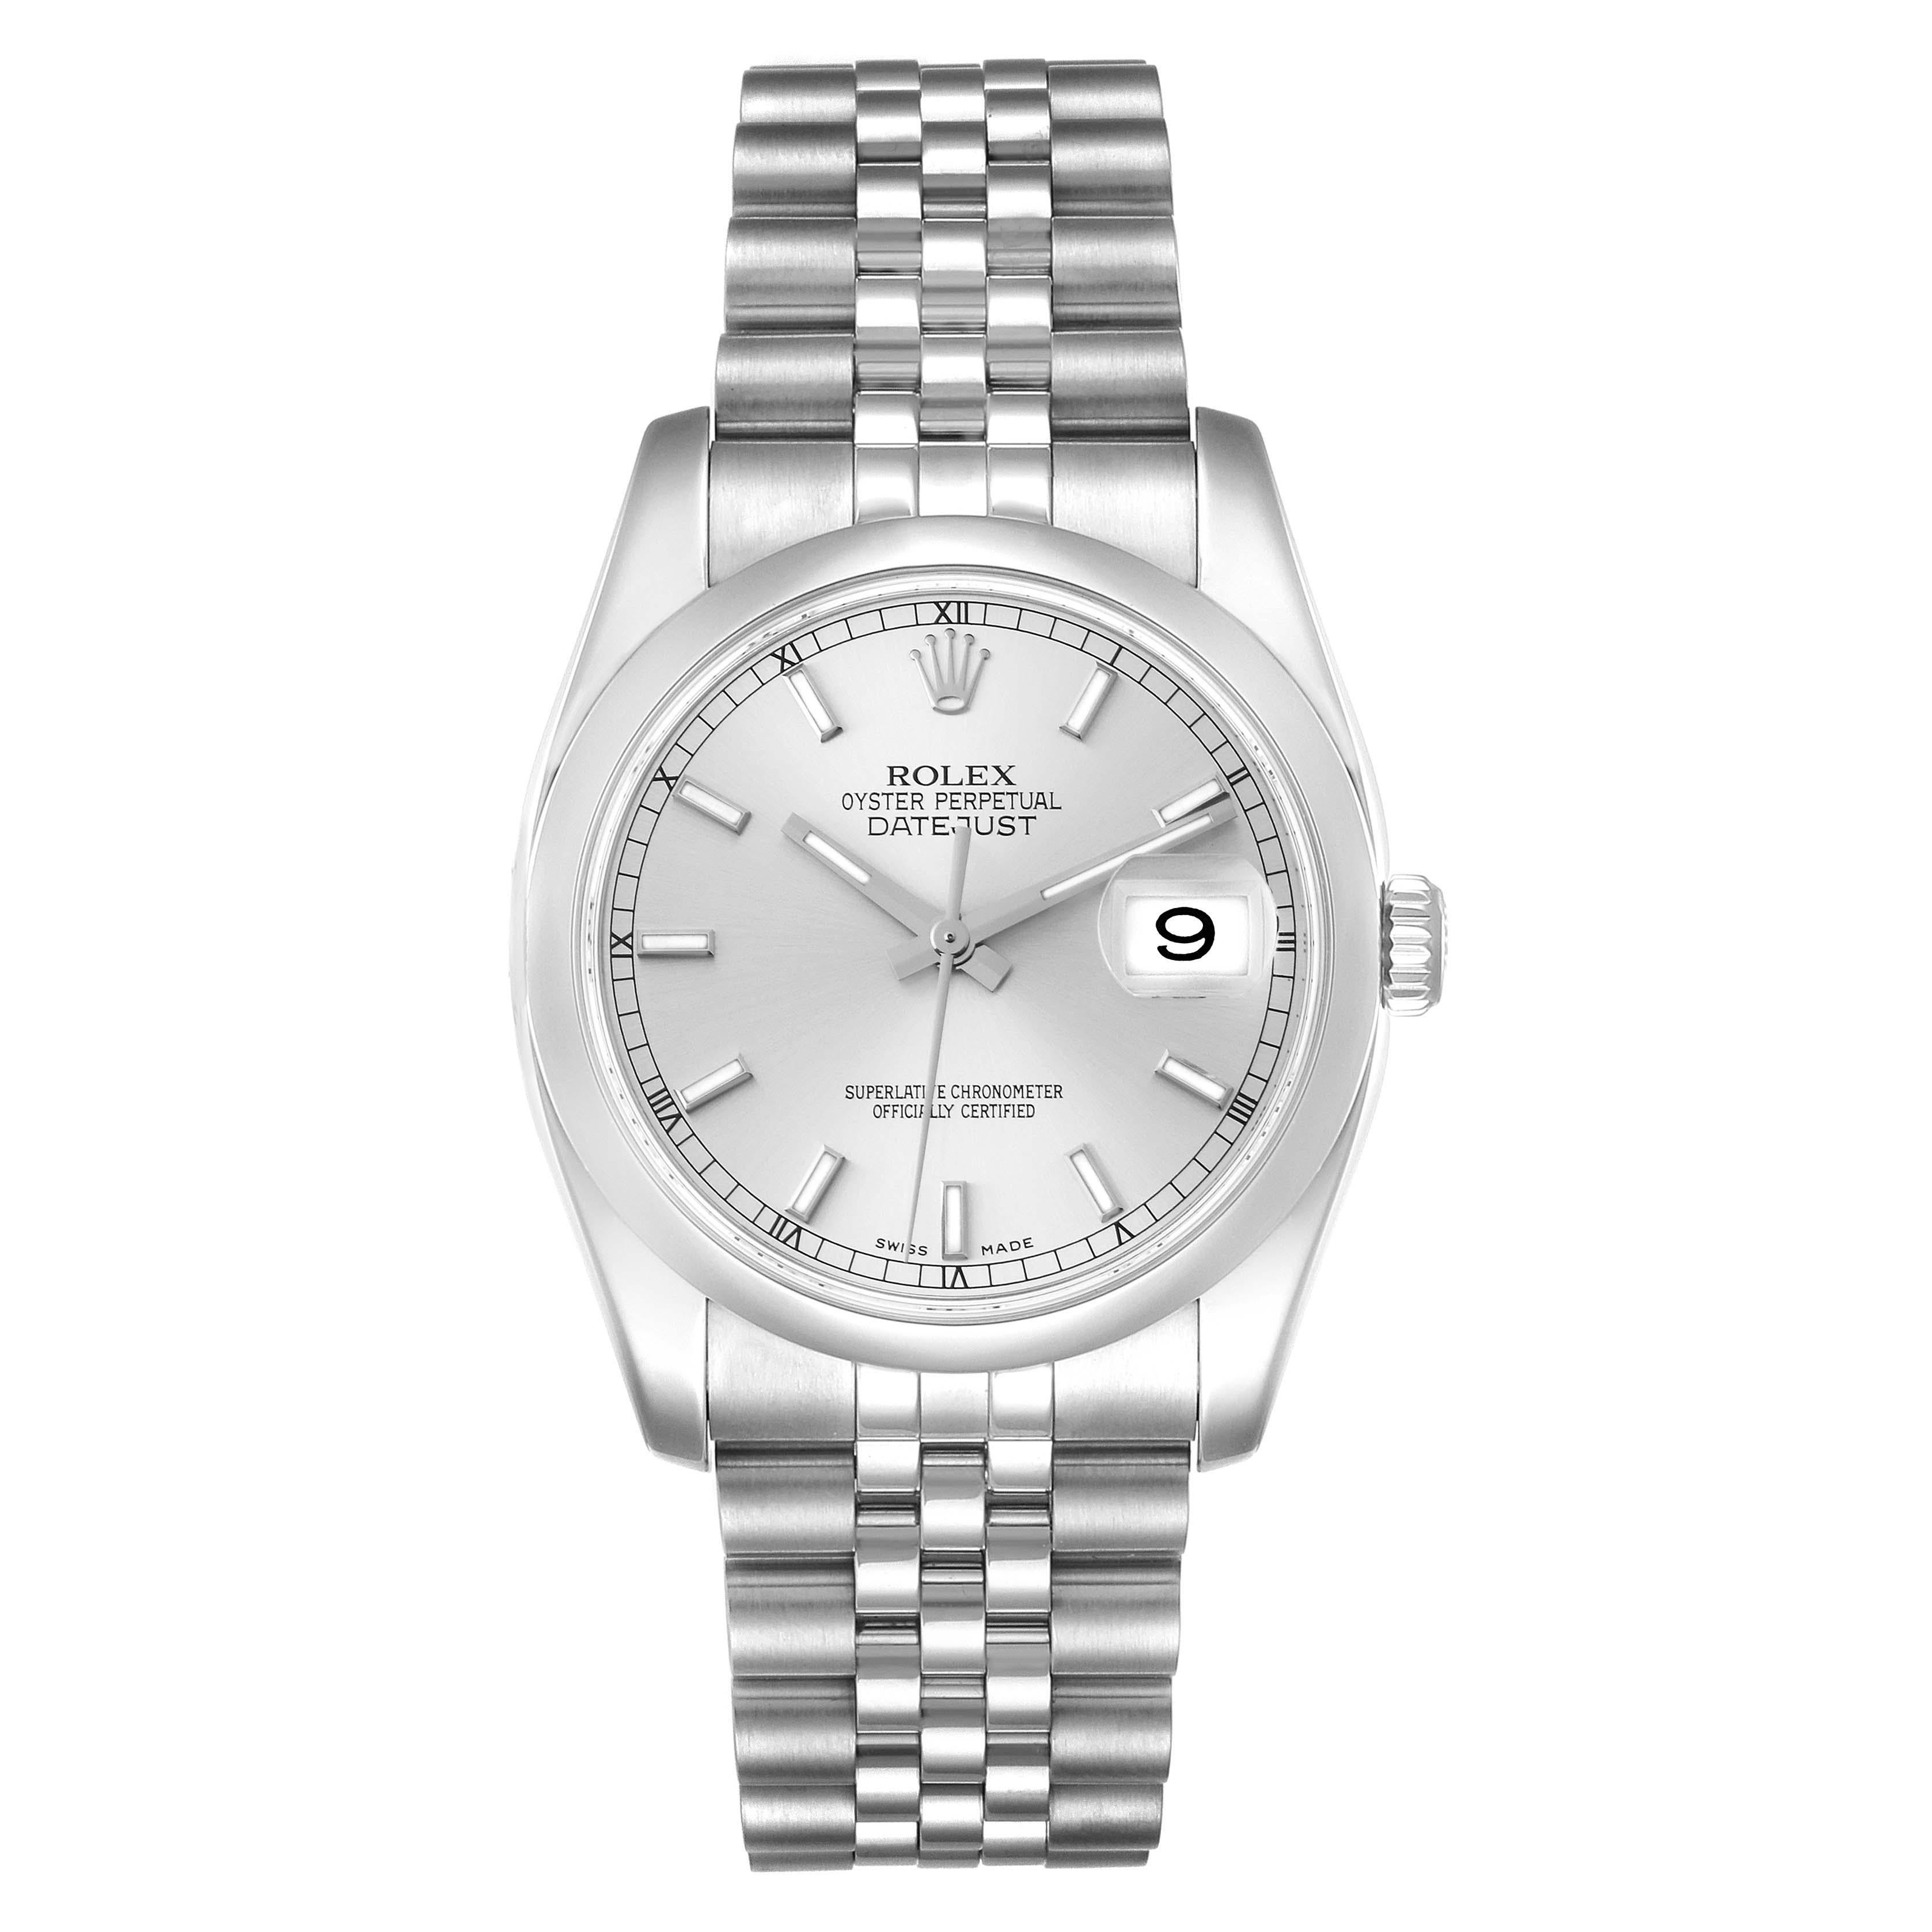 Rolex Datejust Silver Dial Steel Mens Watch 116200 Box Card. Officially certified chronometer automatic self-winding movement. Stainless steel case 36.0 mm in diameter. Rolex logo on a crown. Stainless steel smooth domed bezel. Scratch resistant